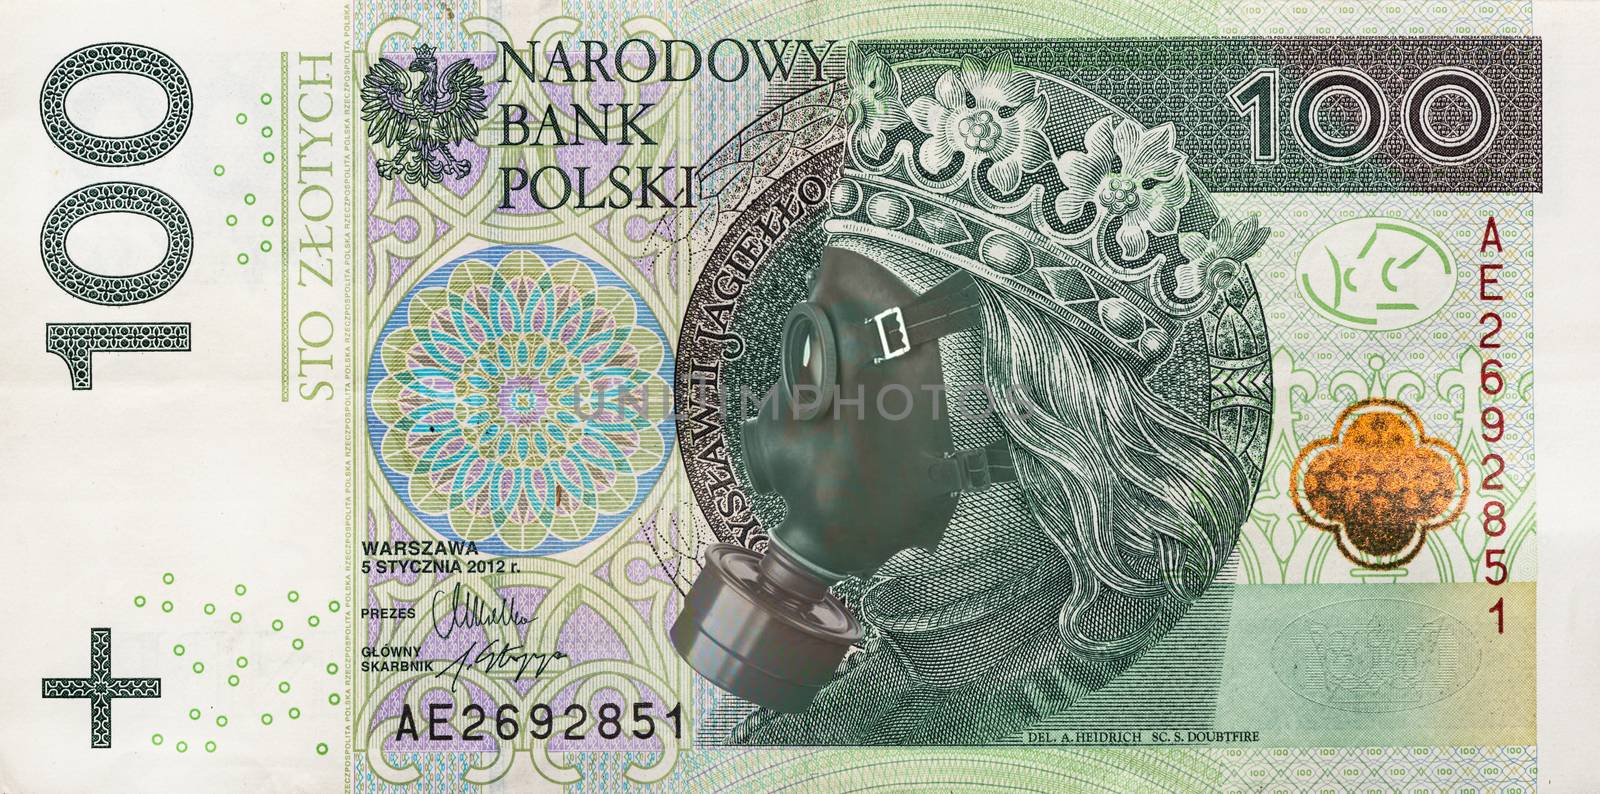 Coronavirus in Poland. Global recession. 100 Polish zloty banknote with a face mask . Polsh economy hit by corona virus covid19 outbreak.